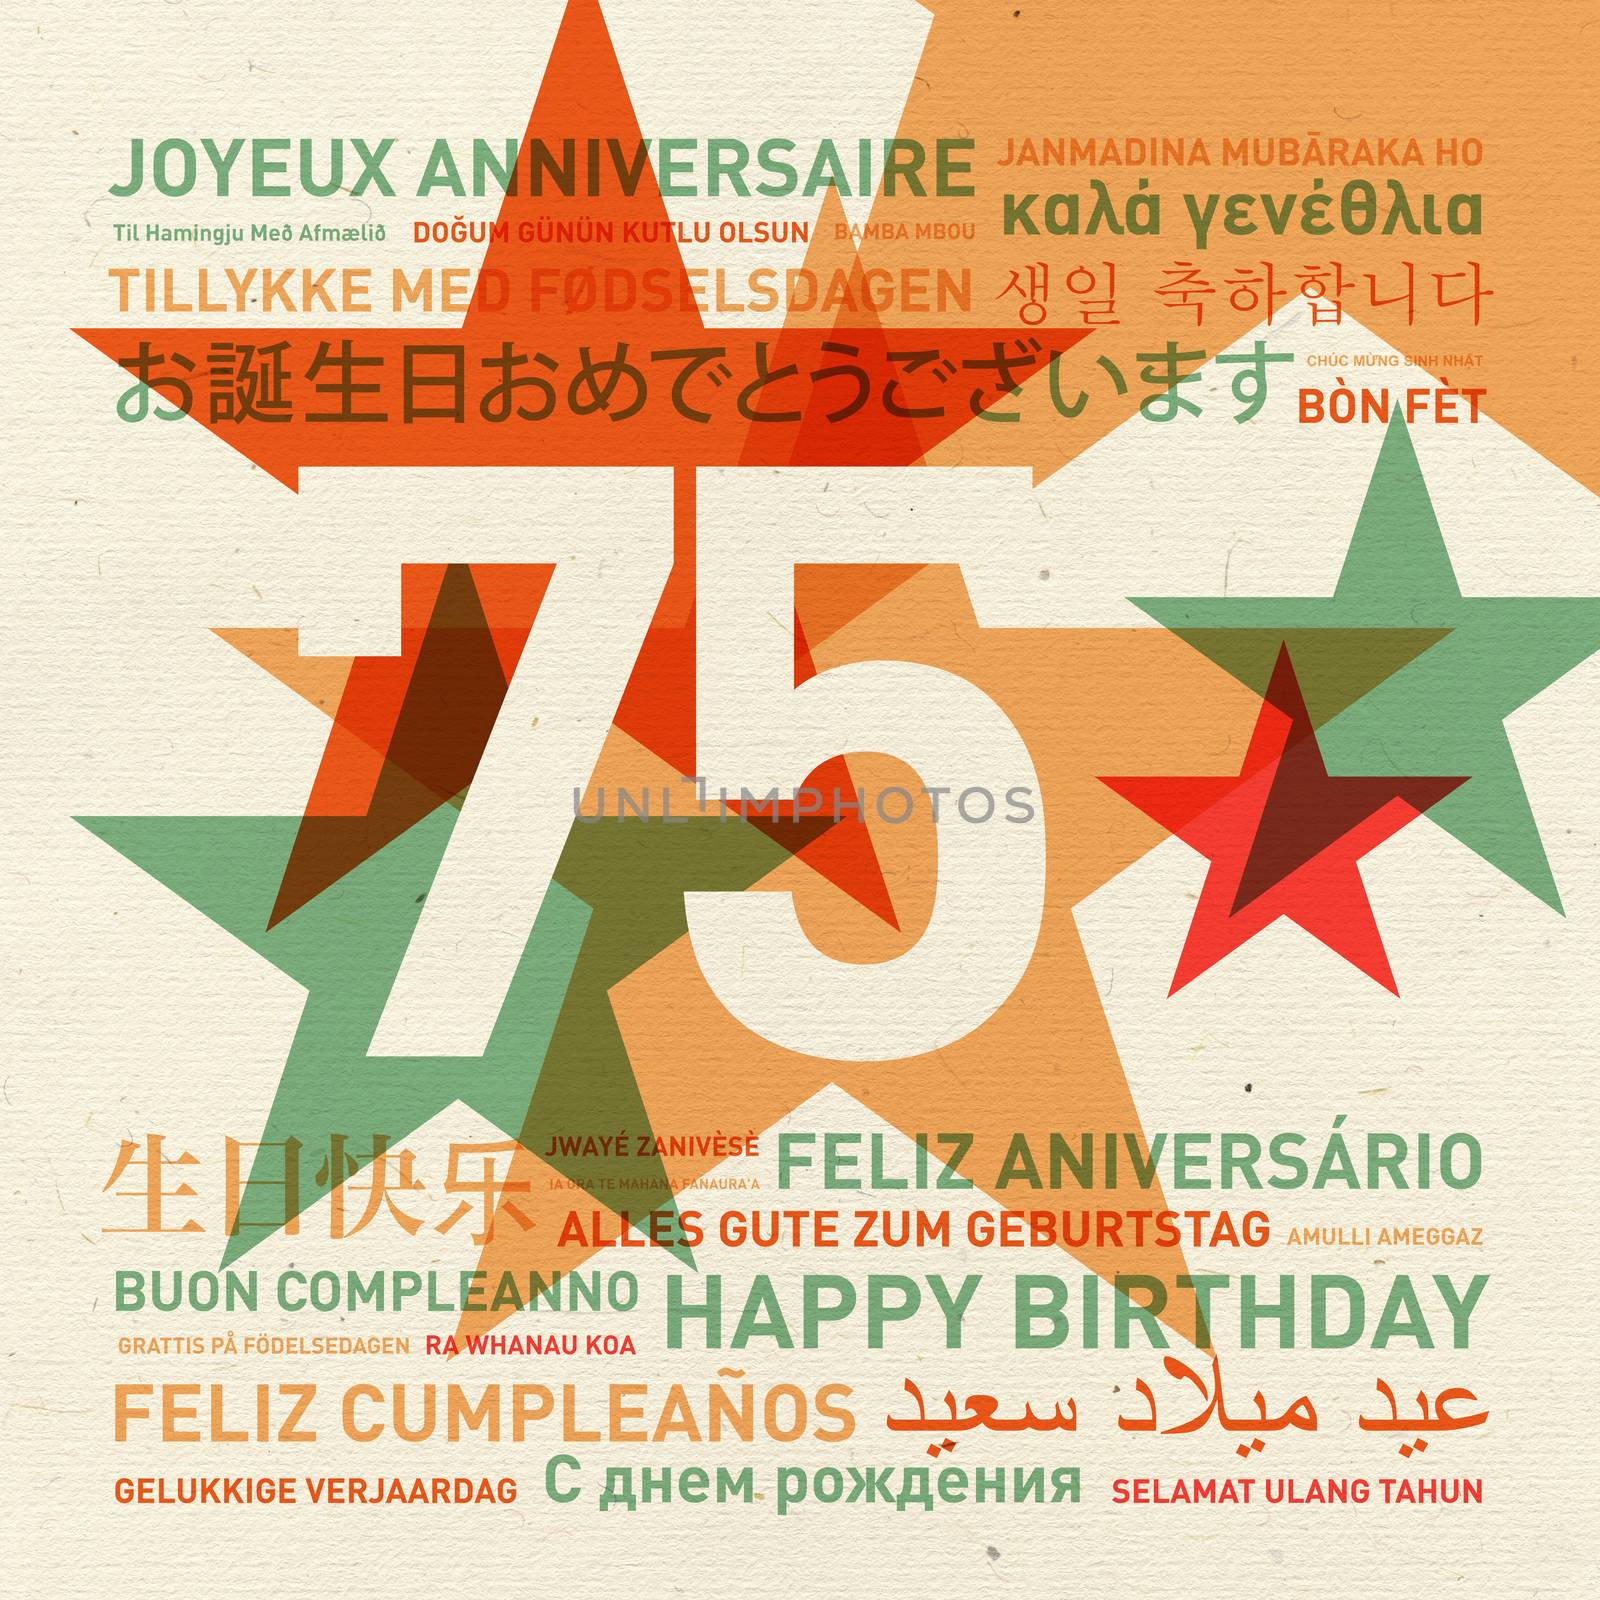 75th anniversary happy birthday from the world. Different languages celebration card